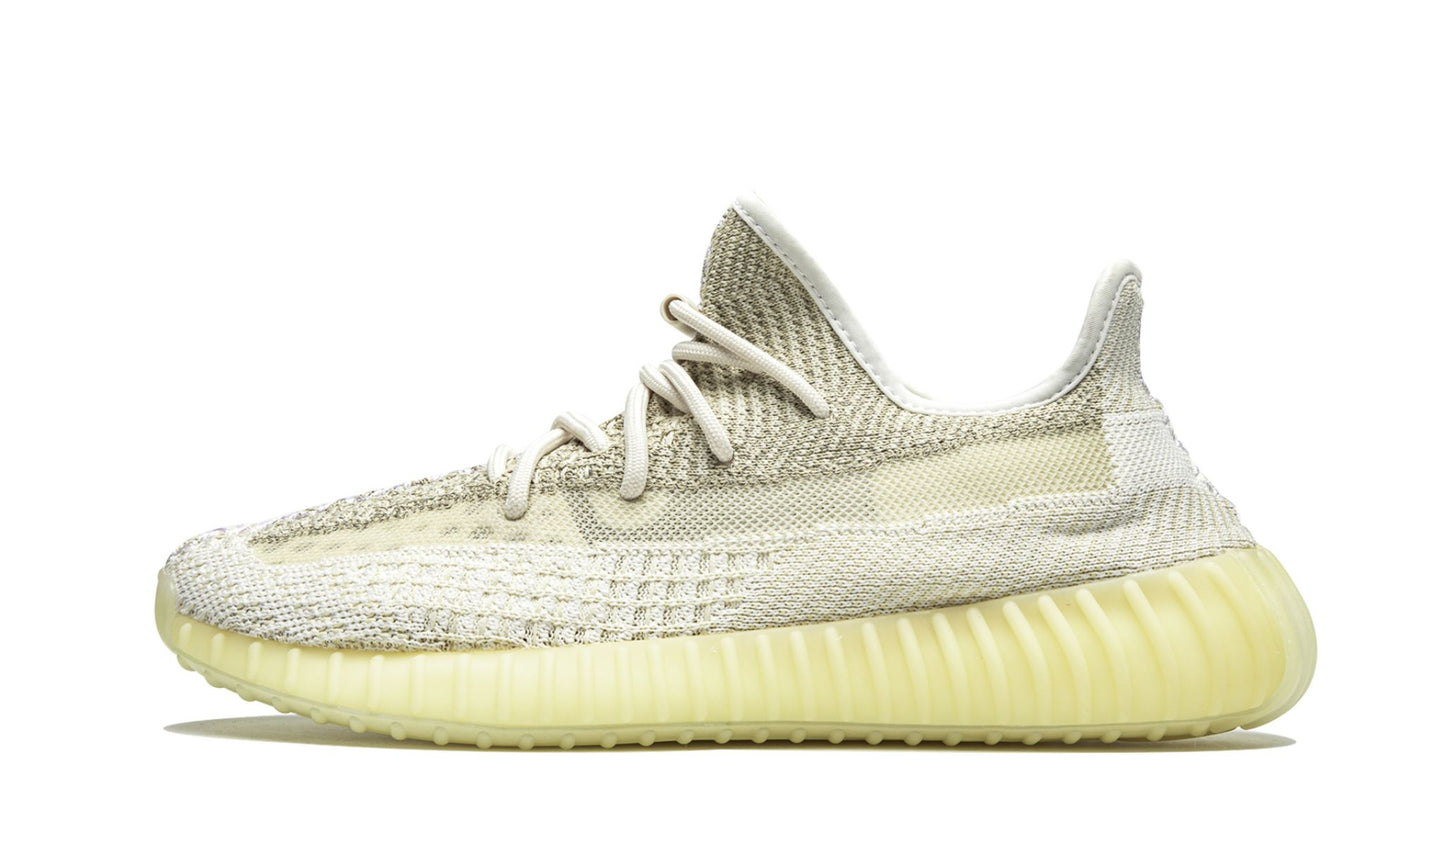 Adidas Yeezy Boost 350 V2 Natural